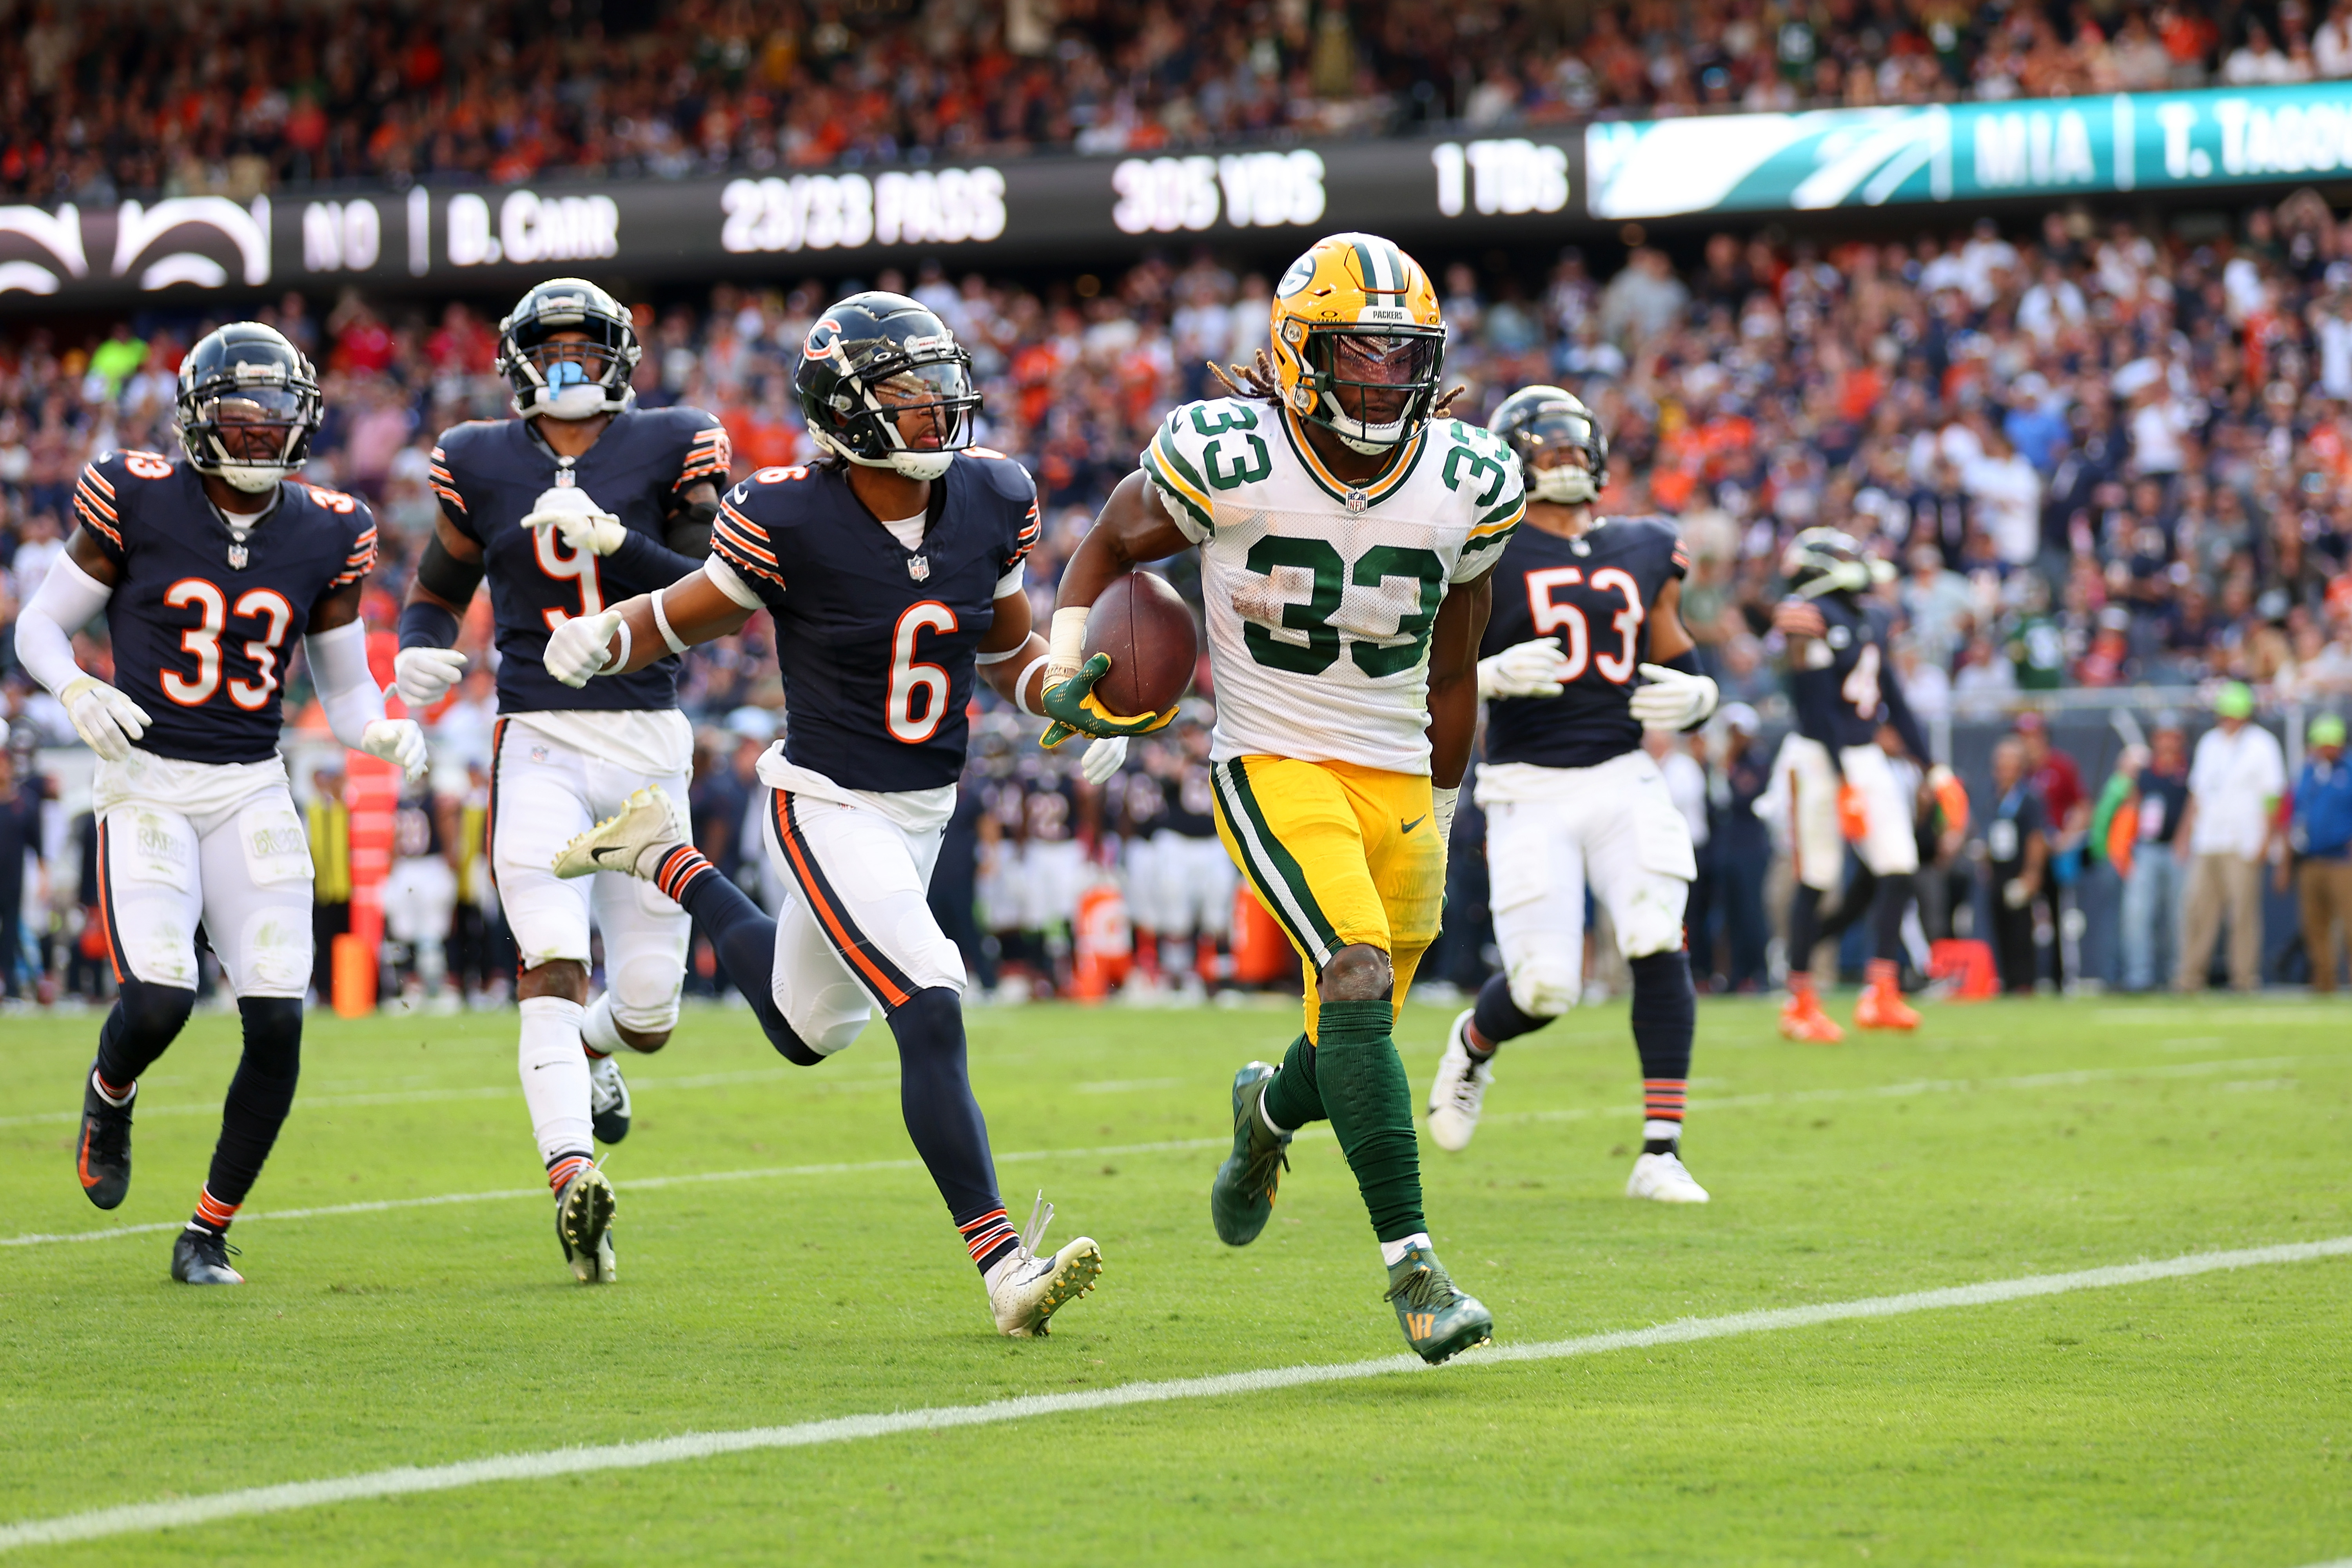 Packers-Bears rivalry is in a new era, but the story hasn't changed yet